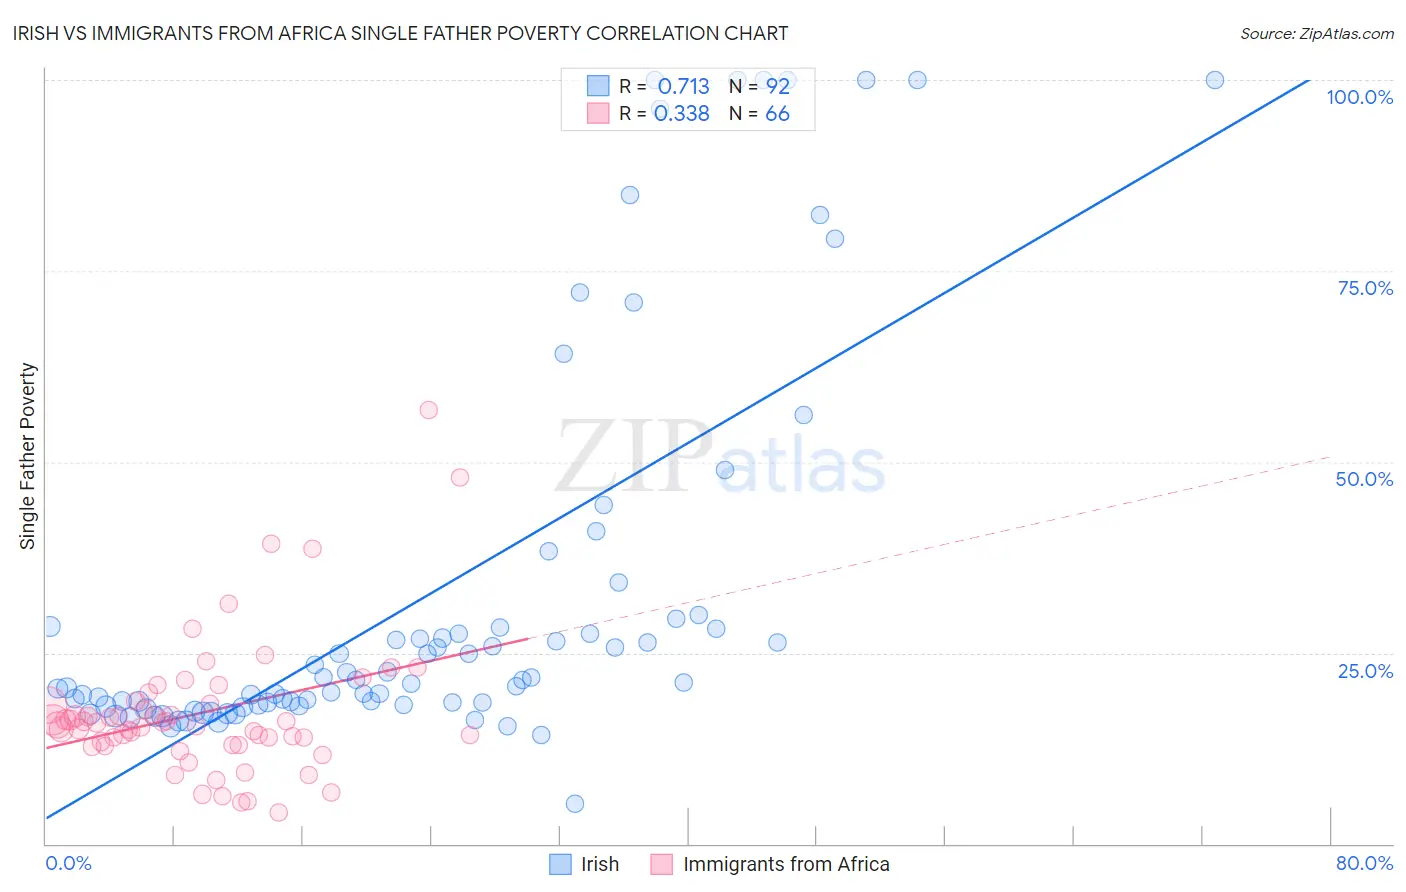 Irish vs Immigrants from Africa Single Father Poverty